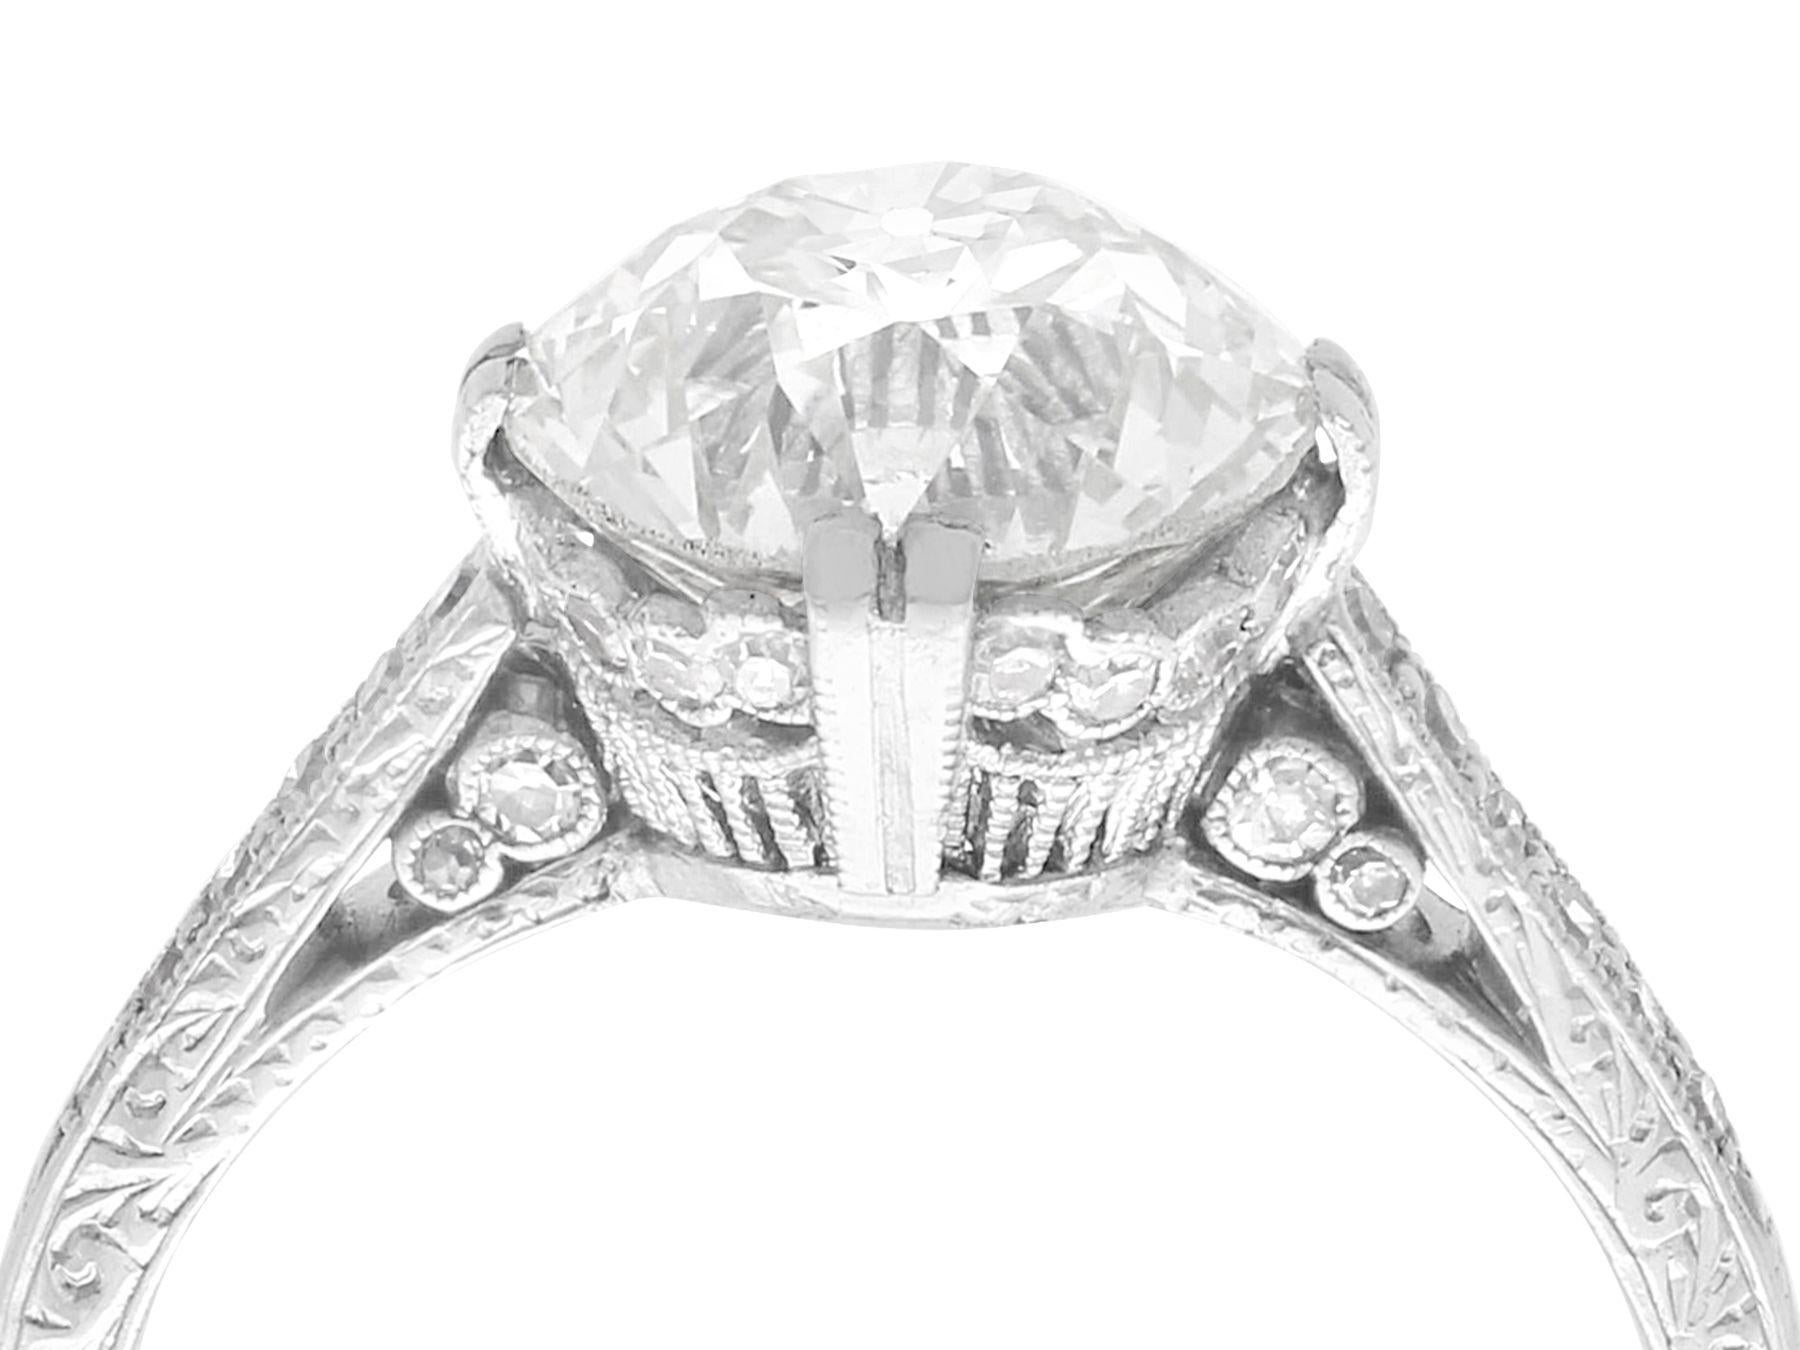 A stunning, fine and impressive antique 3.31 carat diamond (total) and platinum solitaire ring; part of our diamond jewelry/estate jewelry collections.

This stunning, fine and impressive antique solitaire ring has been crafted in platinum.

The